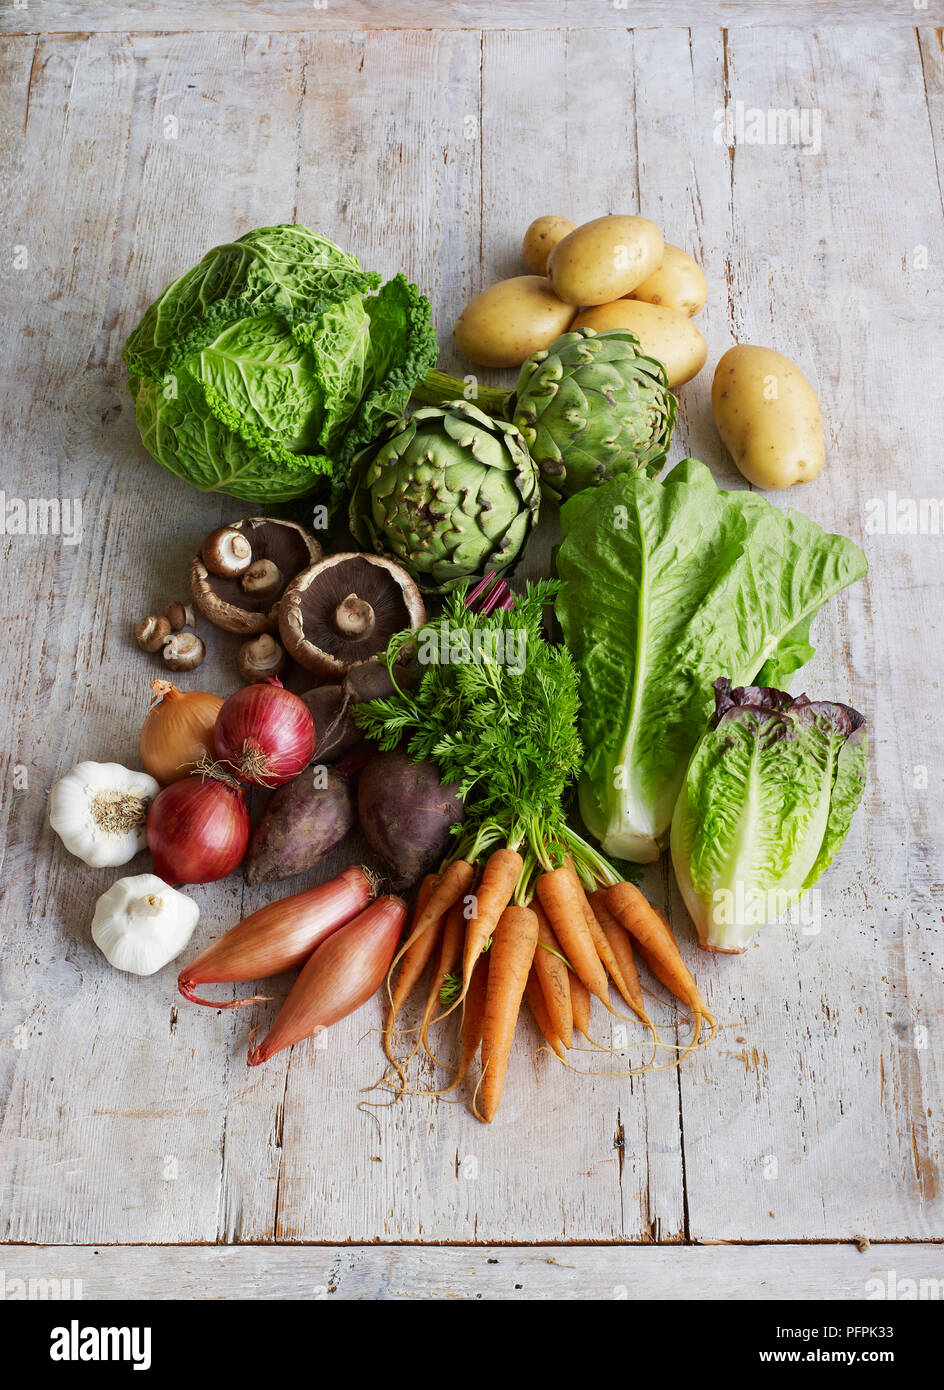 Various fresh vegetables and lettuce on wooden surface Stock Photo